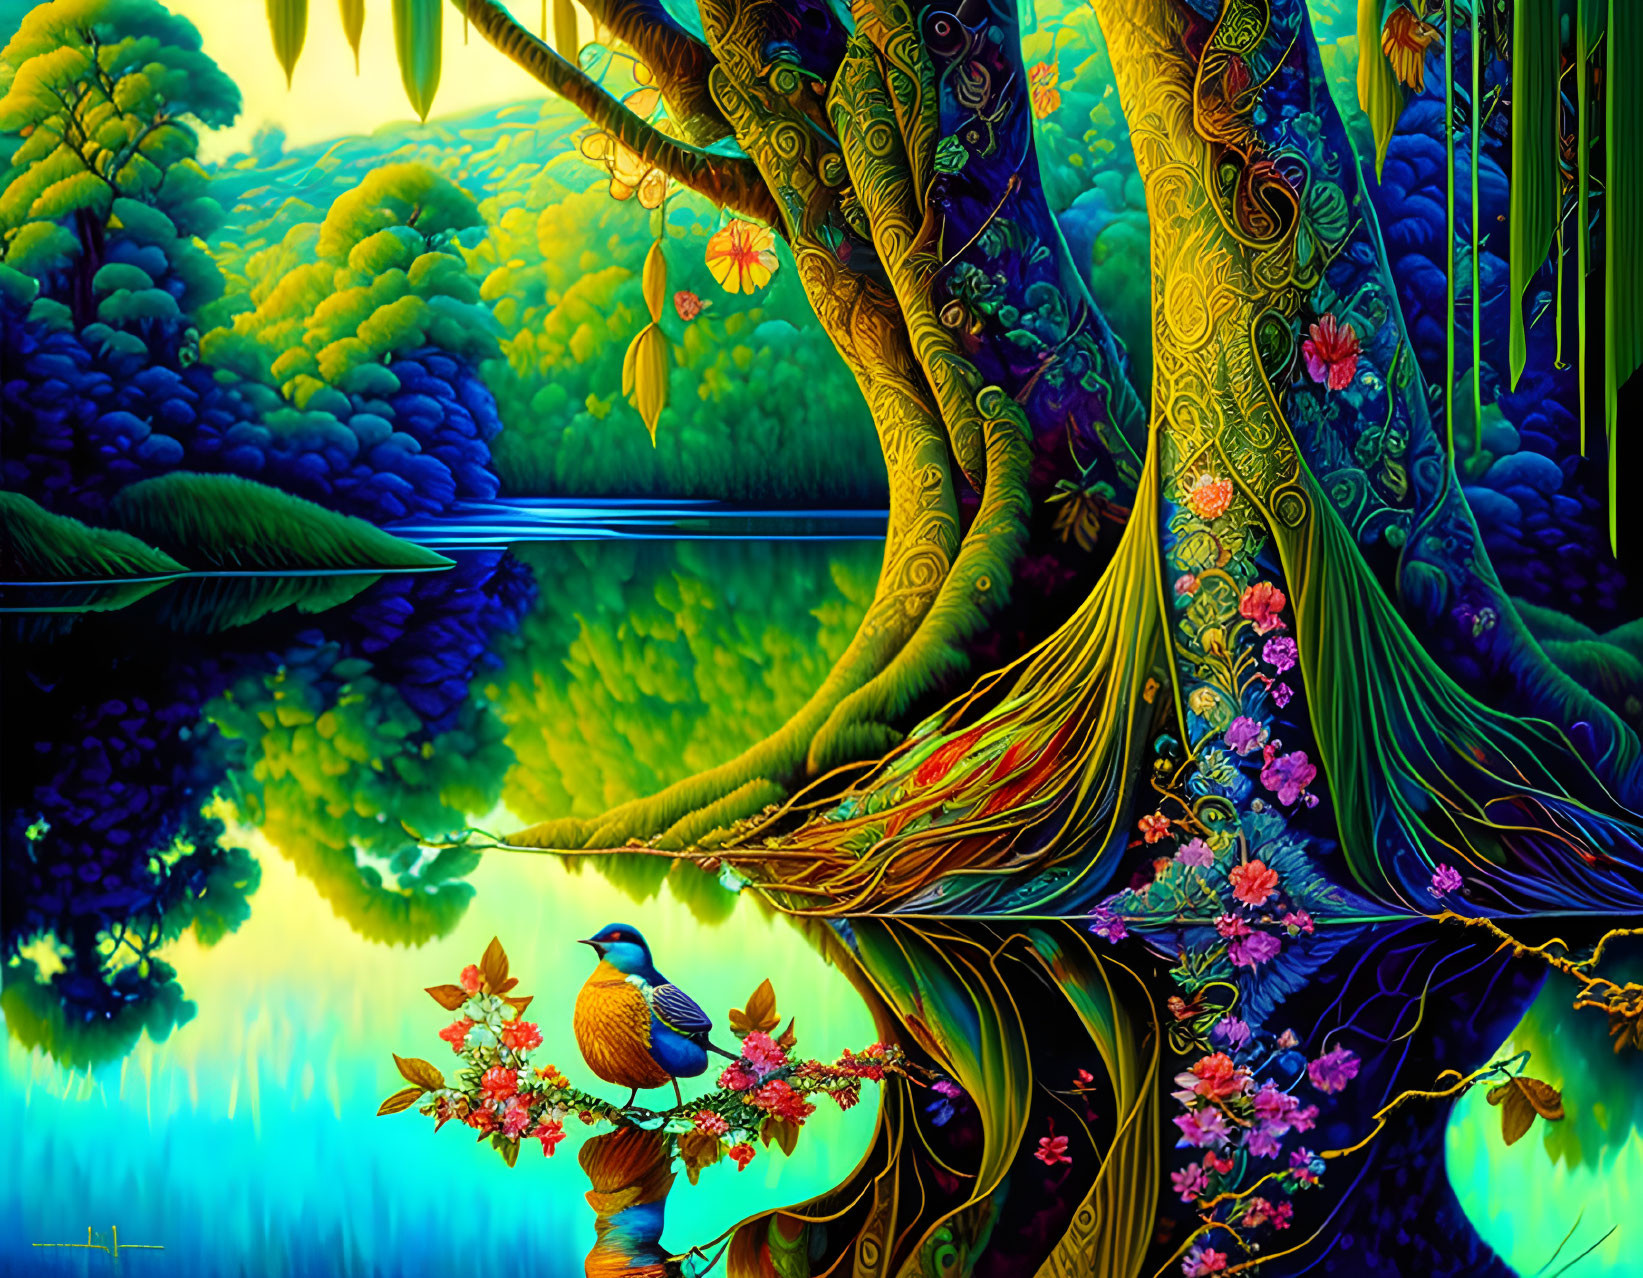 Fantasy forest artwork with colorful trees, flowers, bird, and reflective river